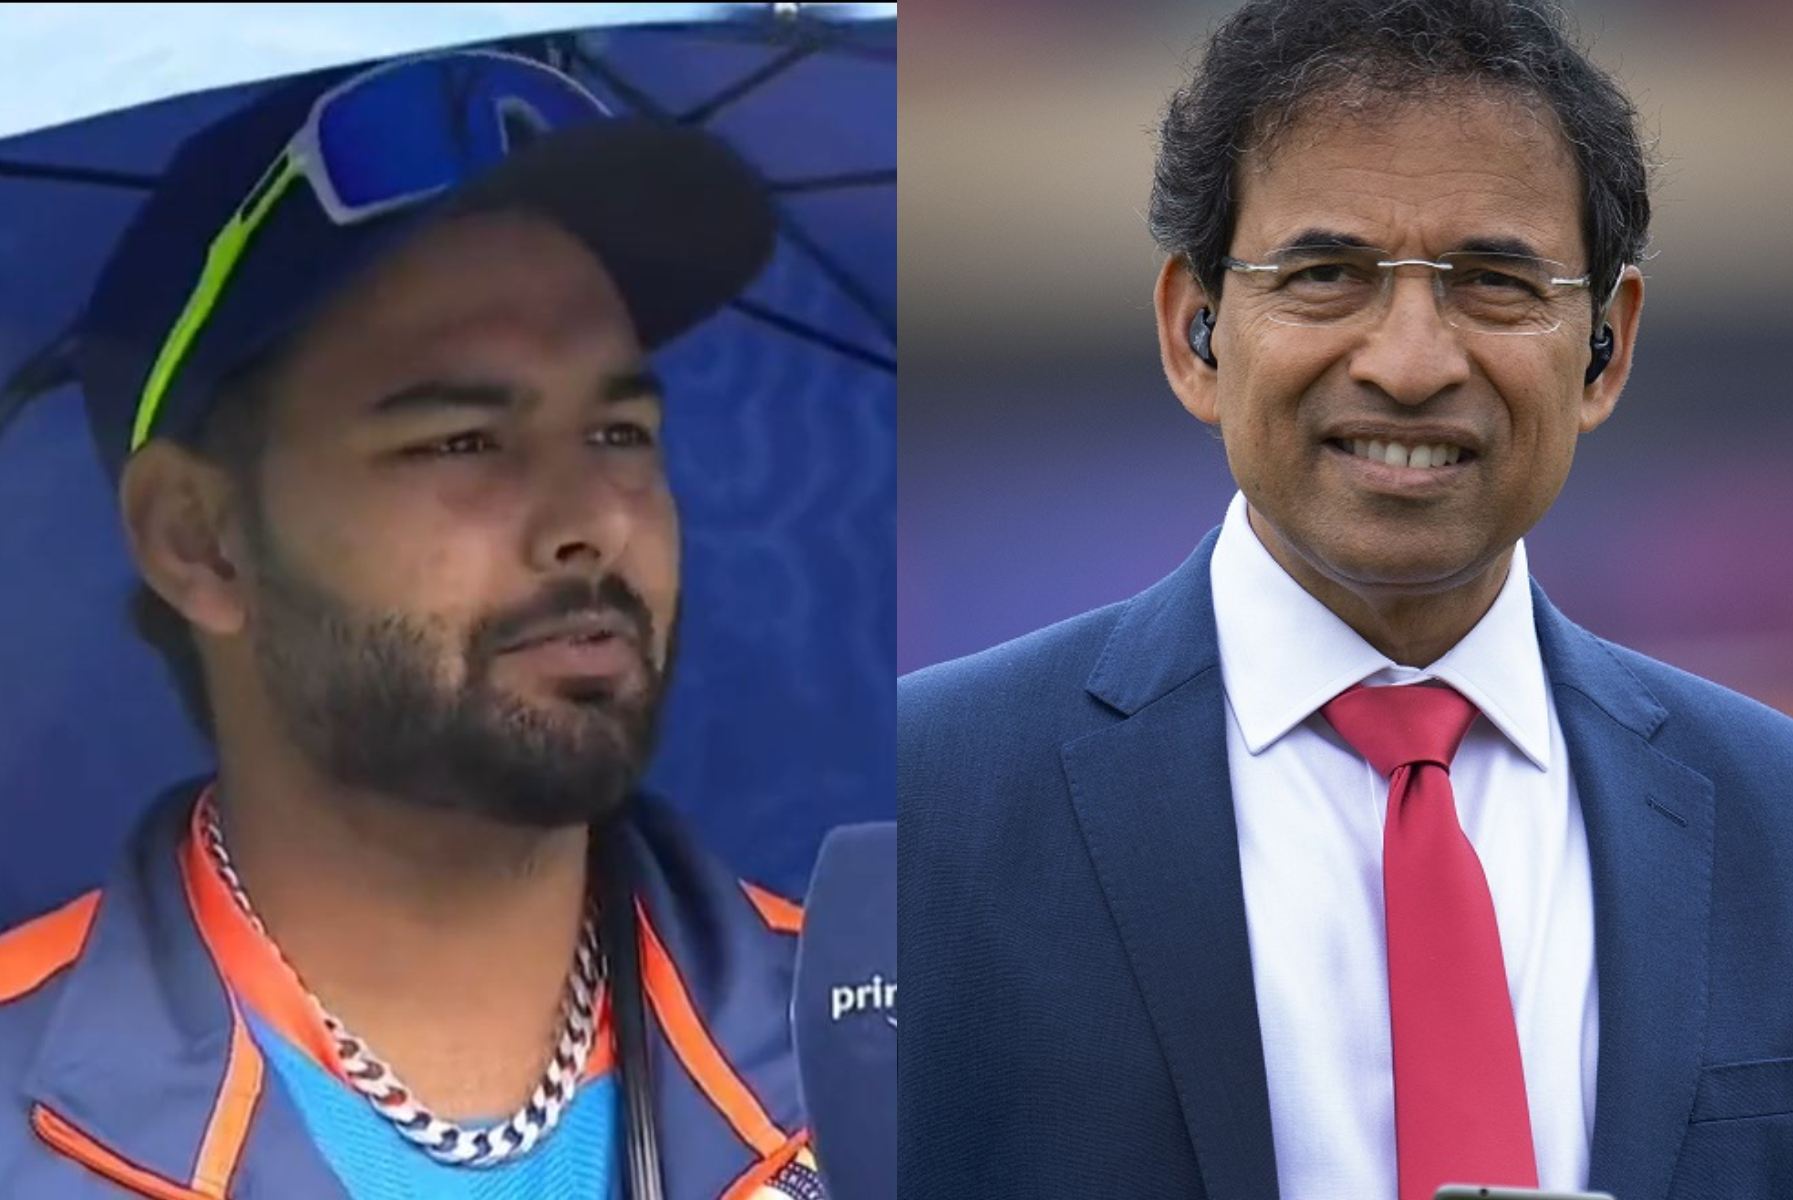 Rishabh Pant was irritated at questions by Harsha Bhogle | Amazon Prime